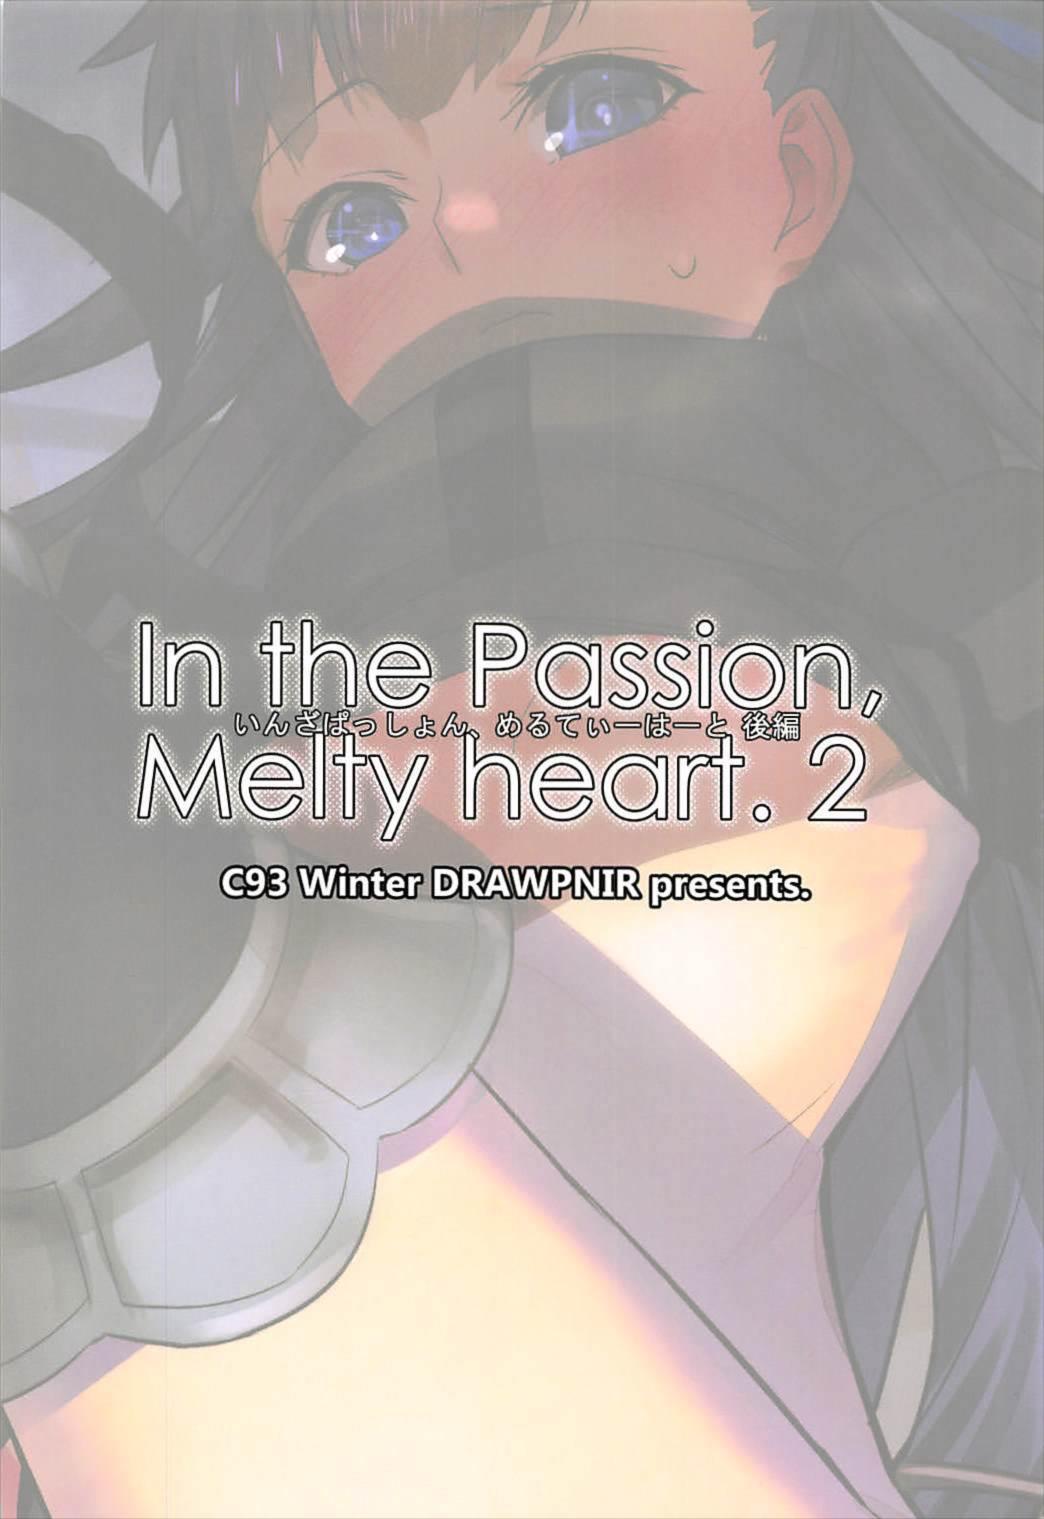 In the Passion Melty heart.2 21